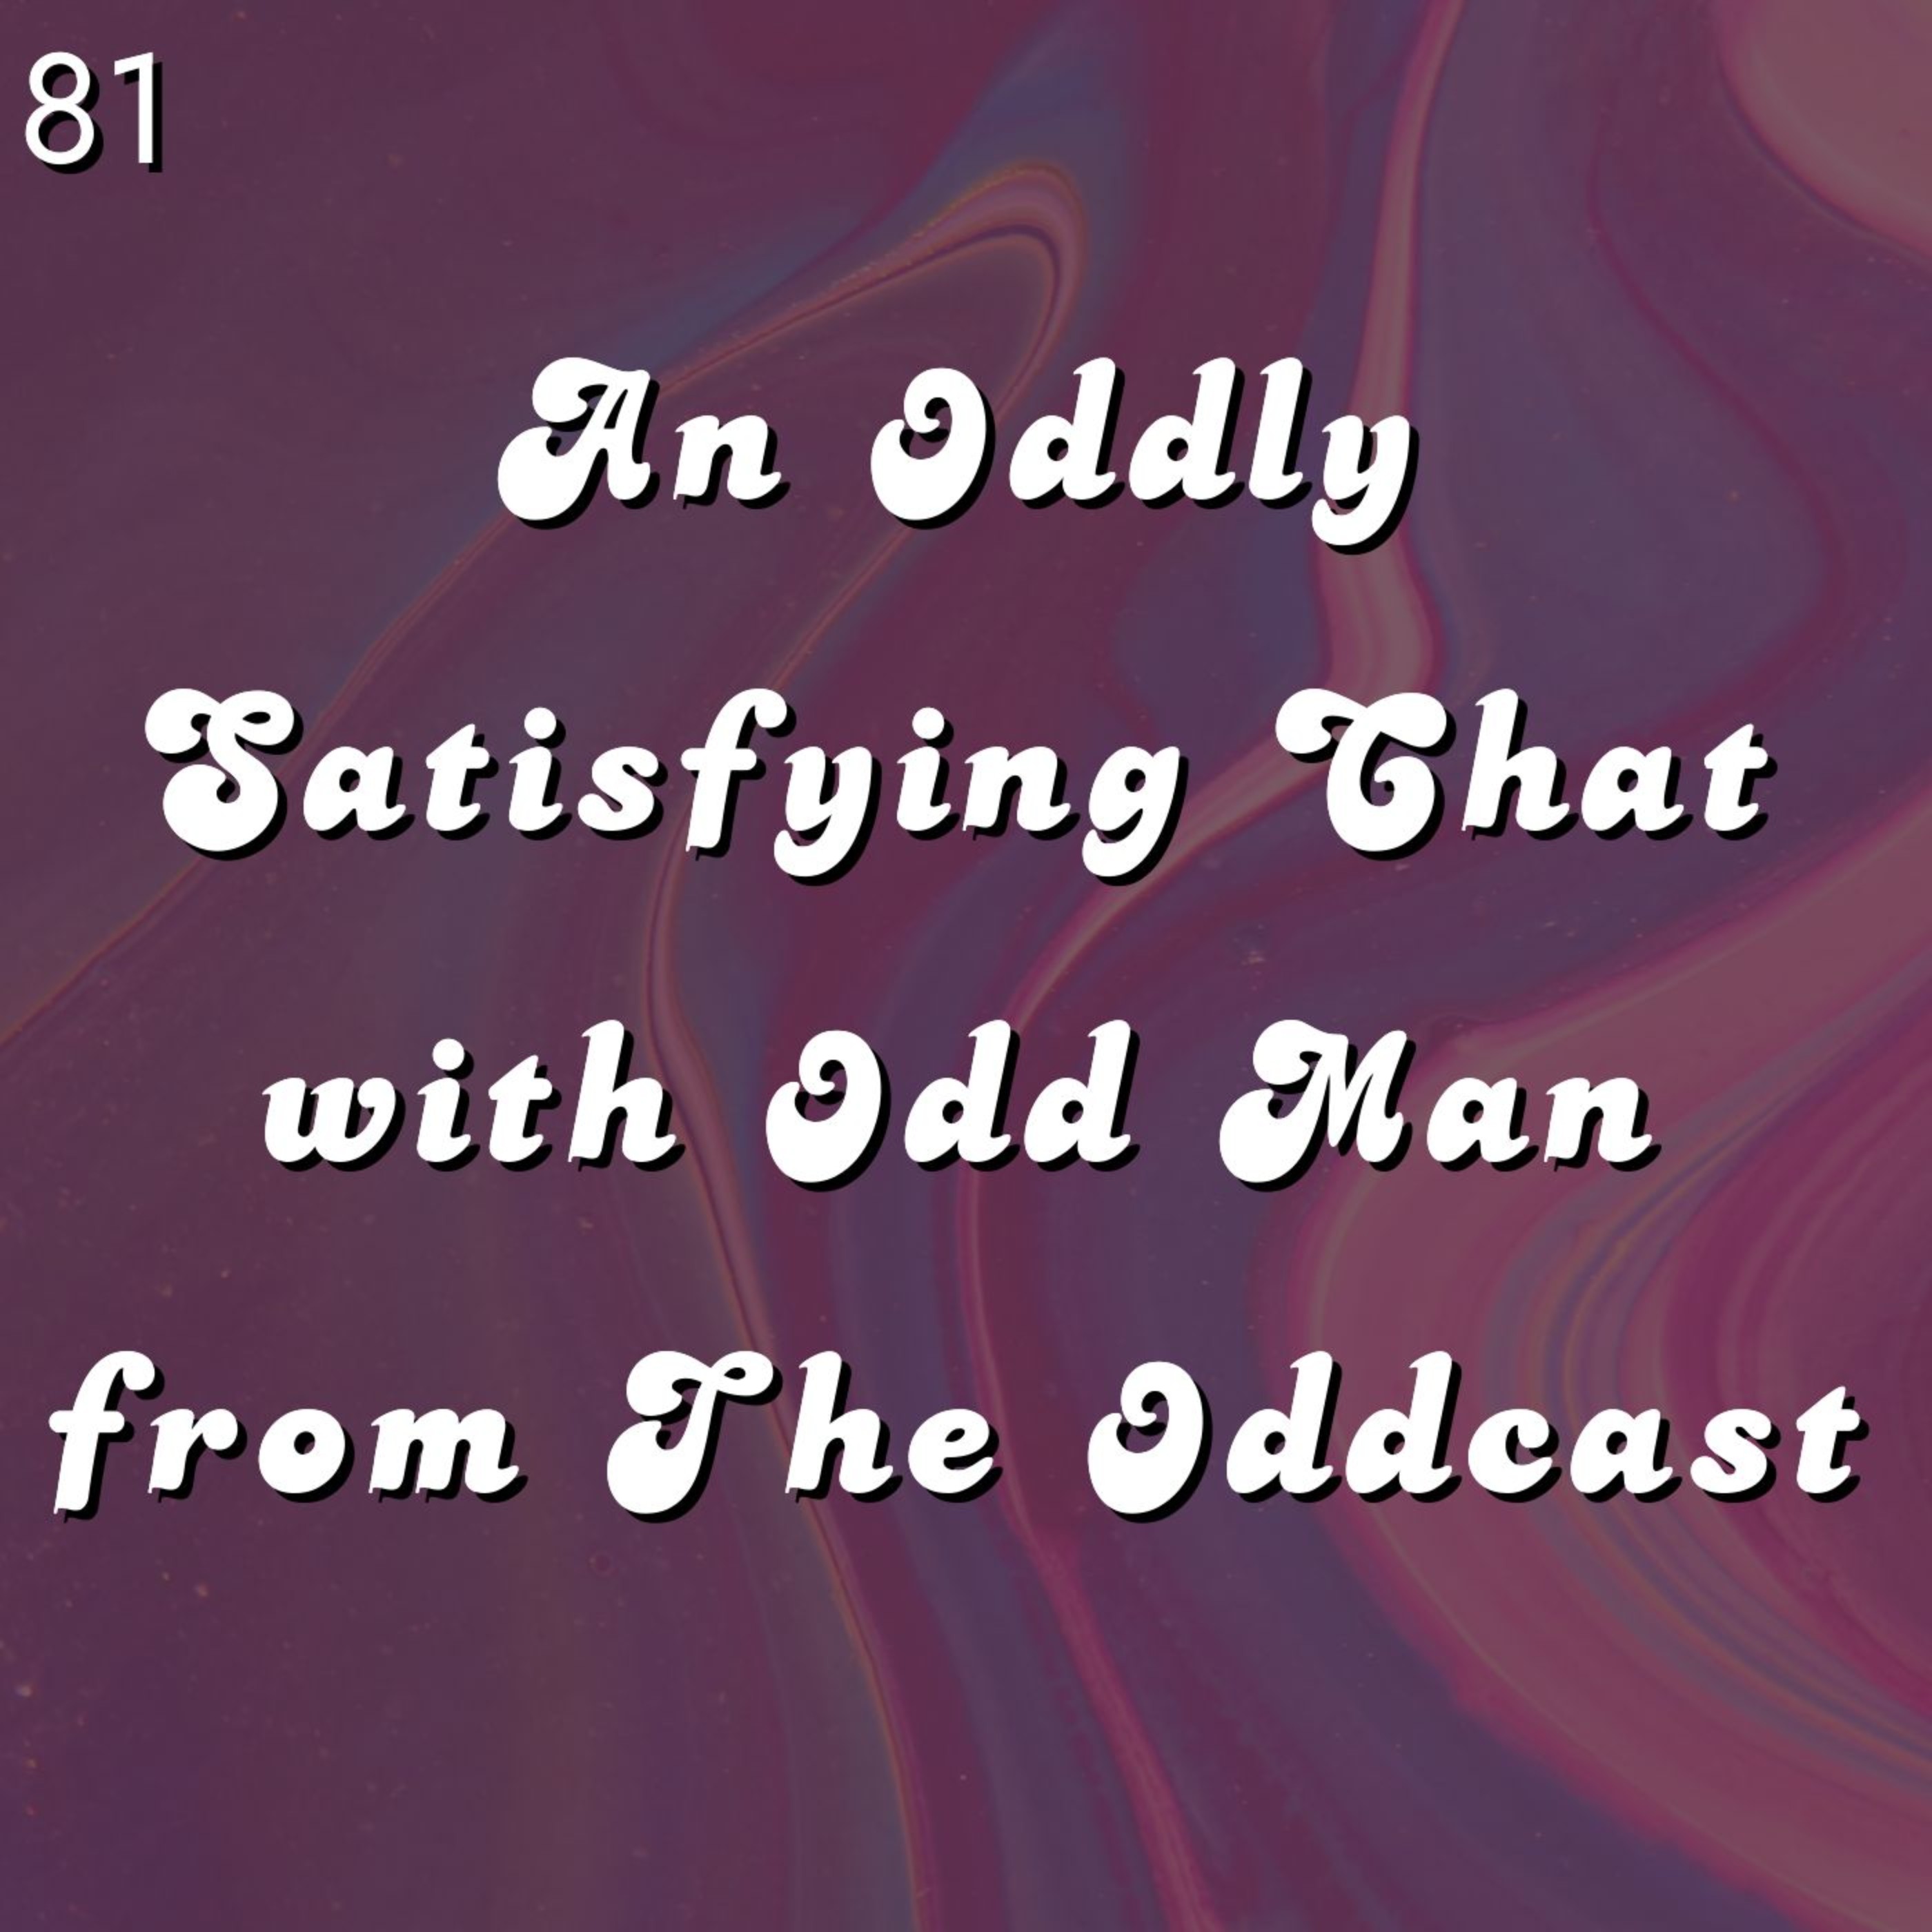 #81 - An Oddly Satisfying Chat with Odd Man from The Oddcast